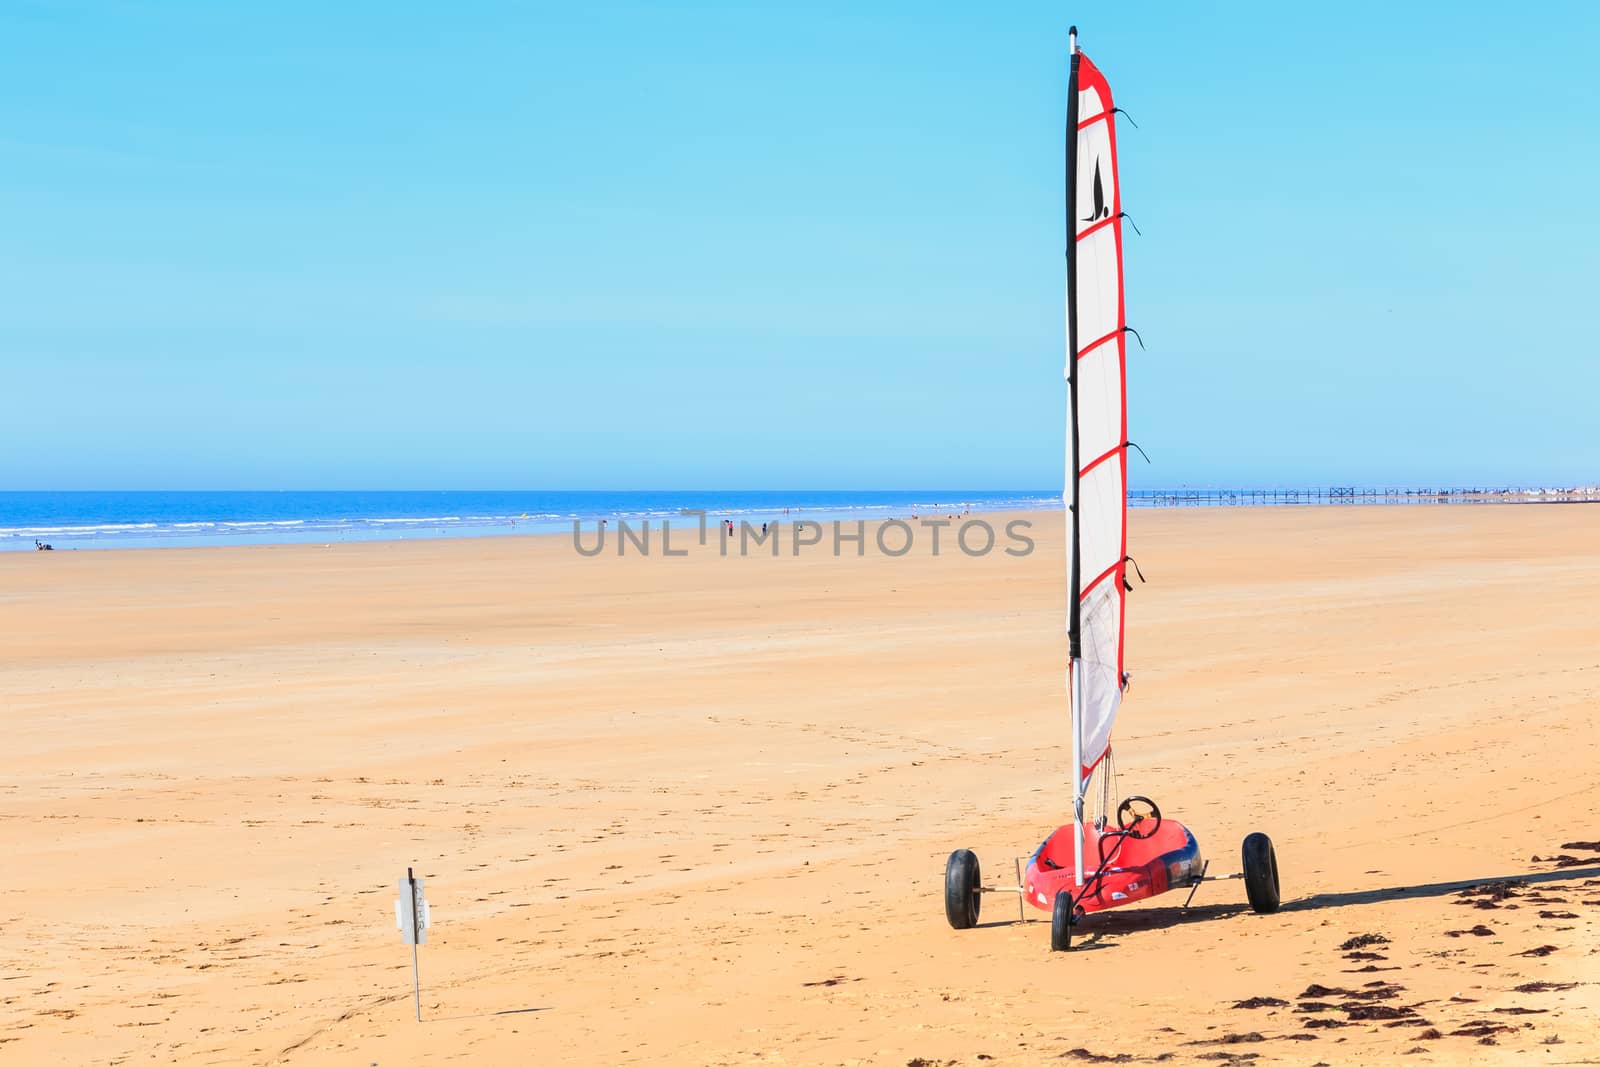 Saint Jean de Monts, France - September 23, 2017 : training sand yacht with a shuttlecock for training kids on the beach on a summer day